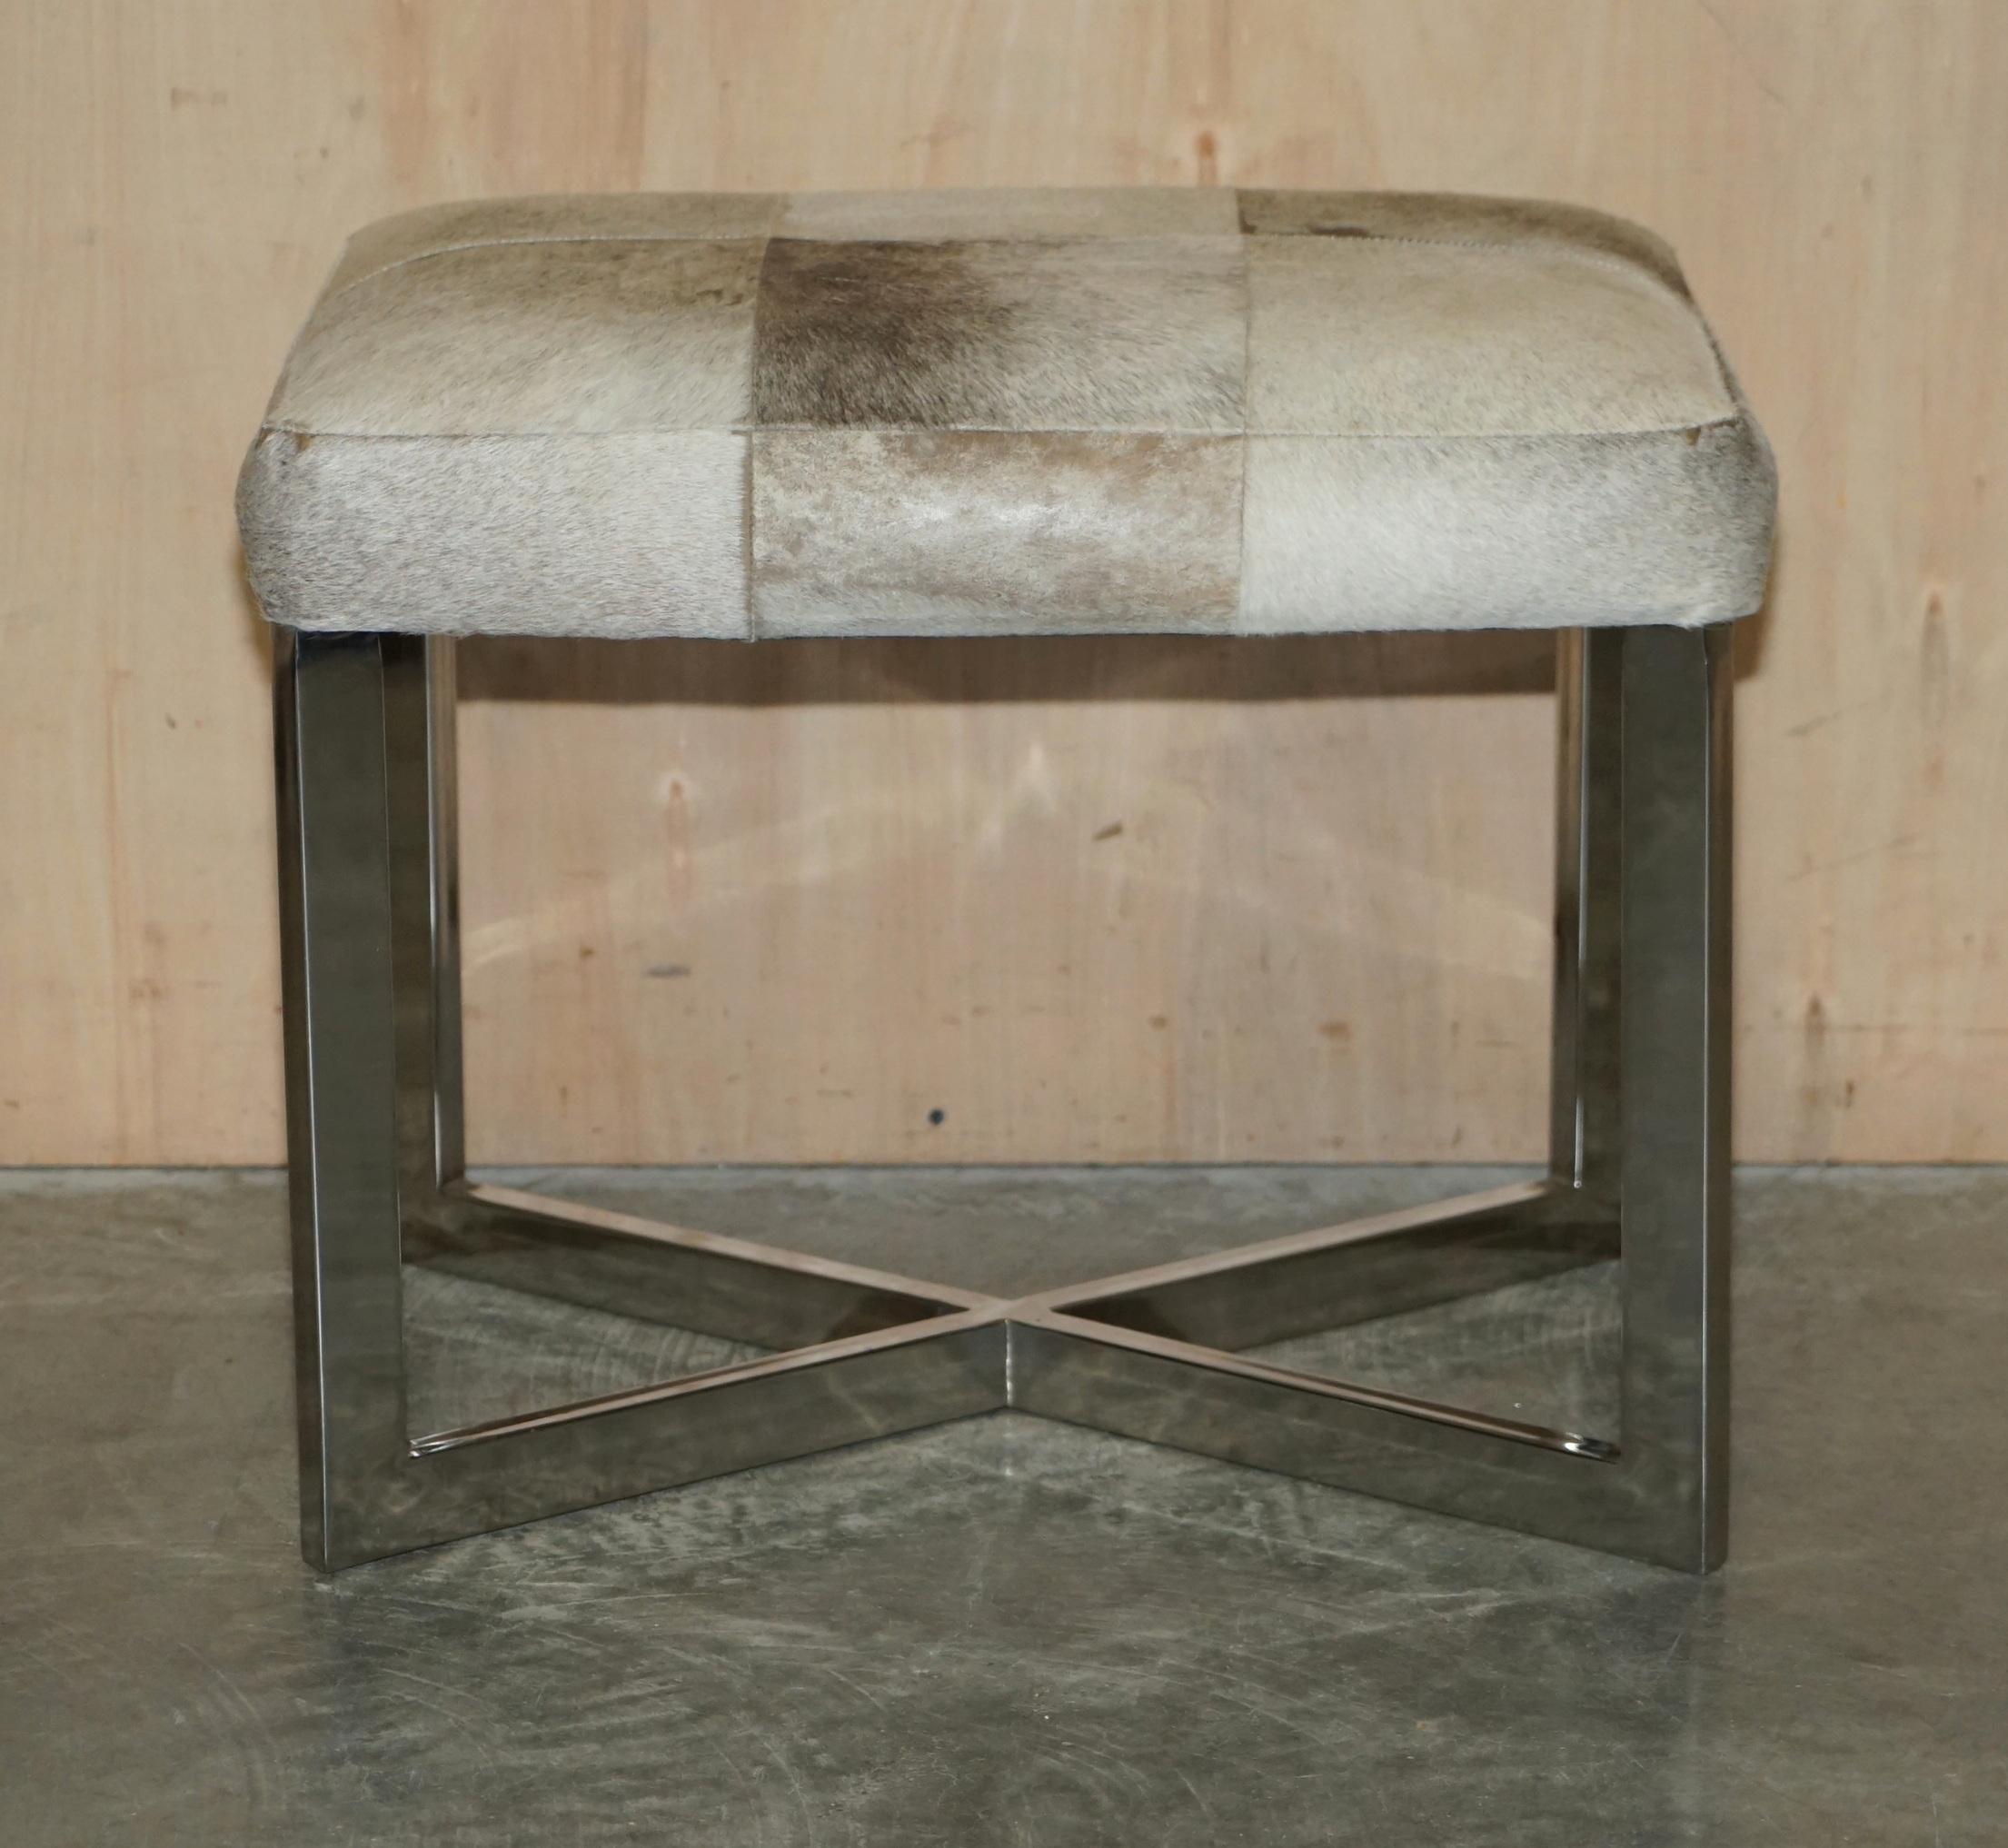 This is delighted to offer this lovely Eichholtz Pony hide trestle stool for desks or dressing tables.

This is a very good looking well made and comfortable stool, I have the matching trestle desk listed under my other items